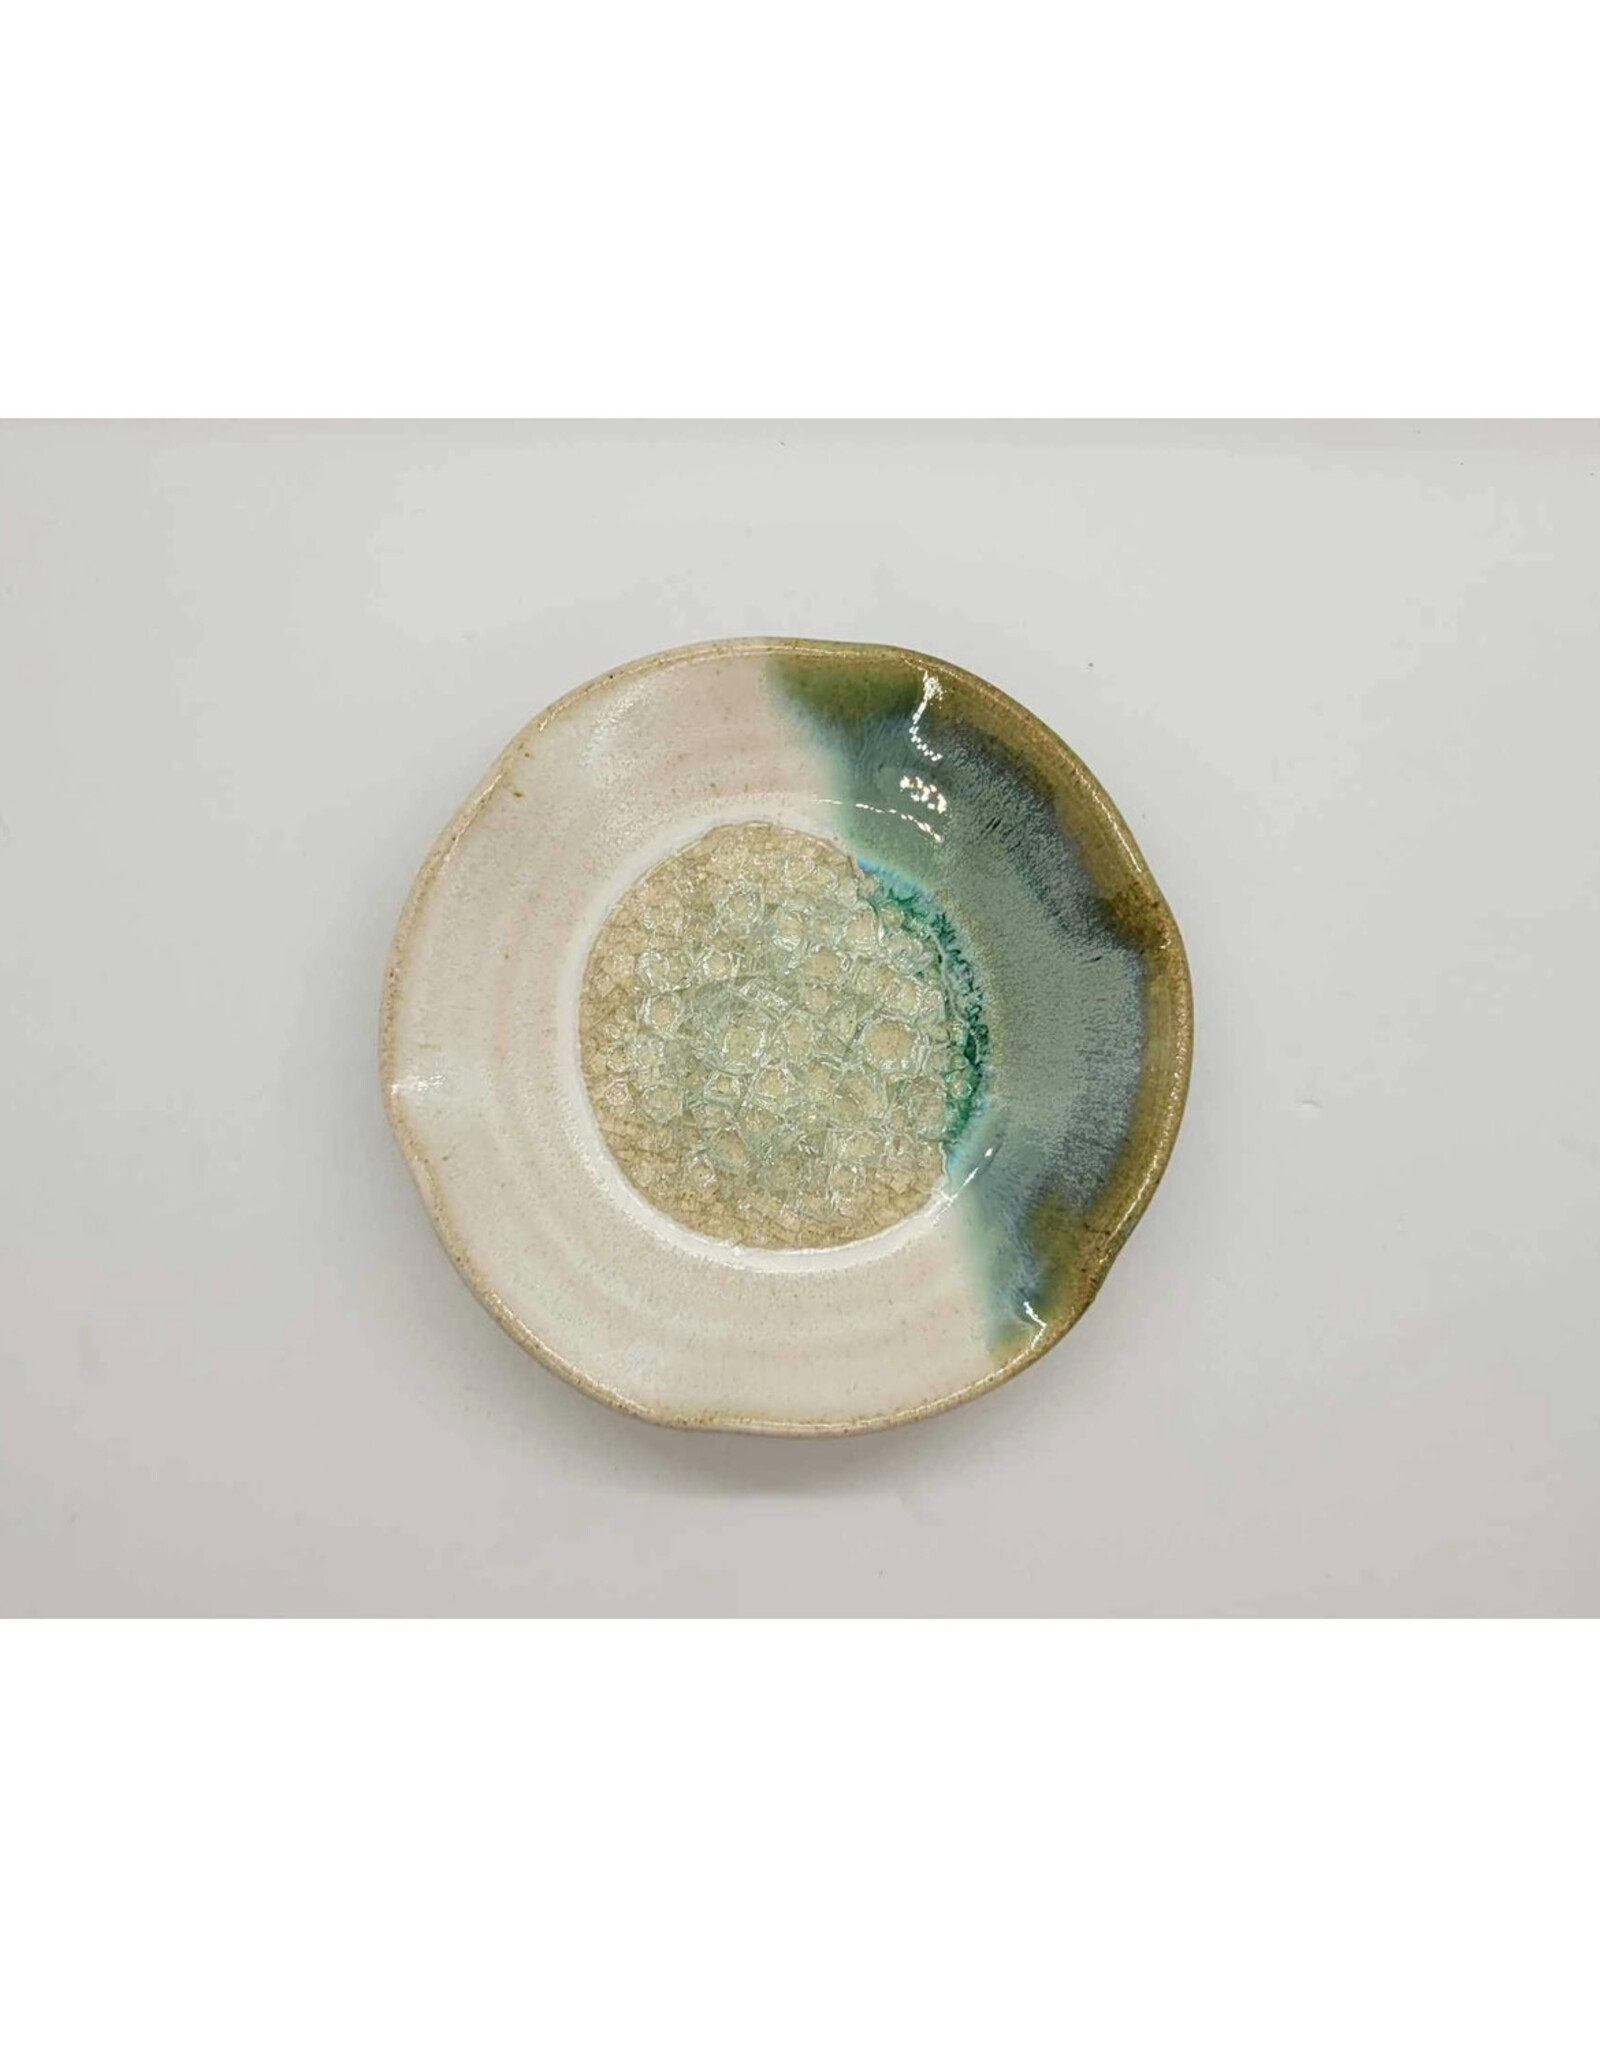 Dock 6 Pottery Ripple Dish - White Pearl